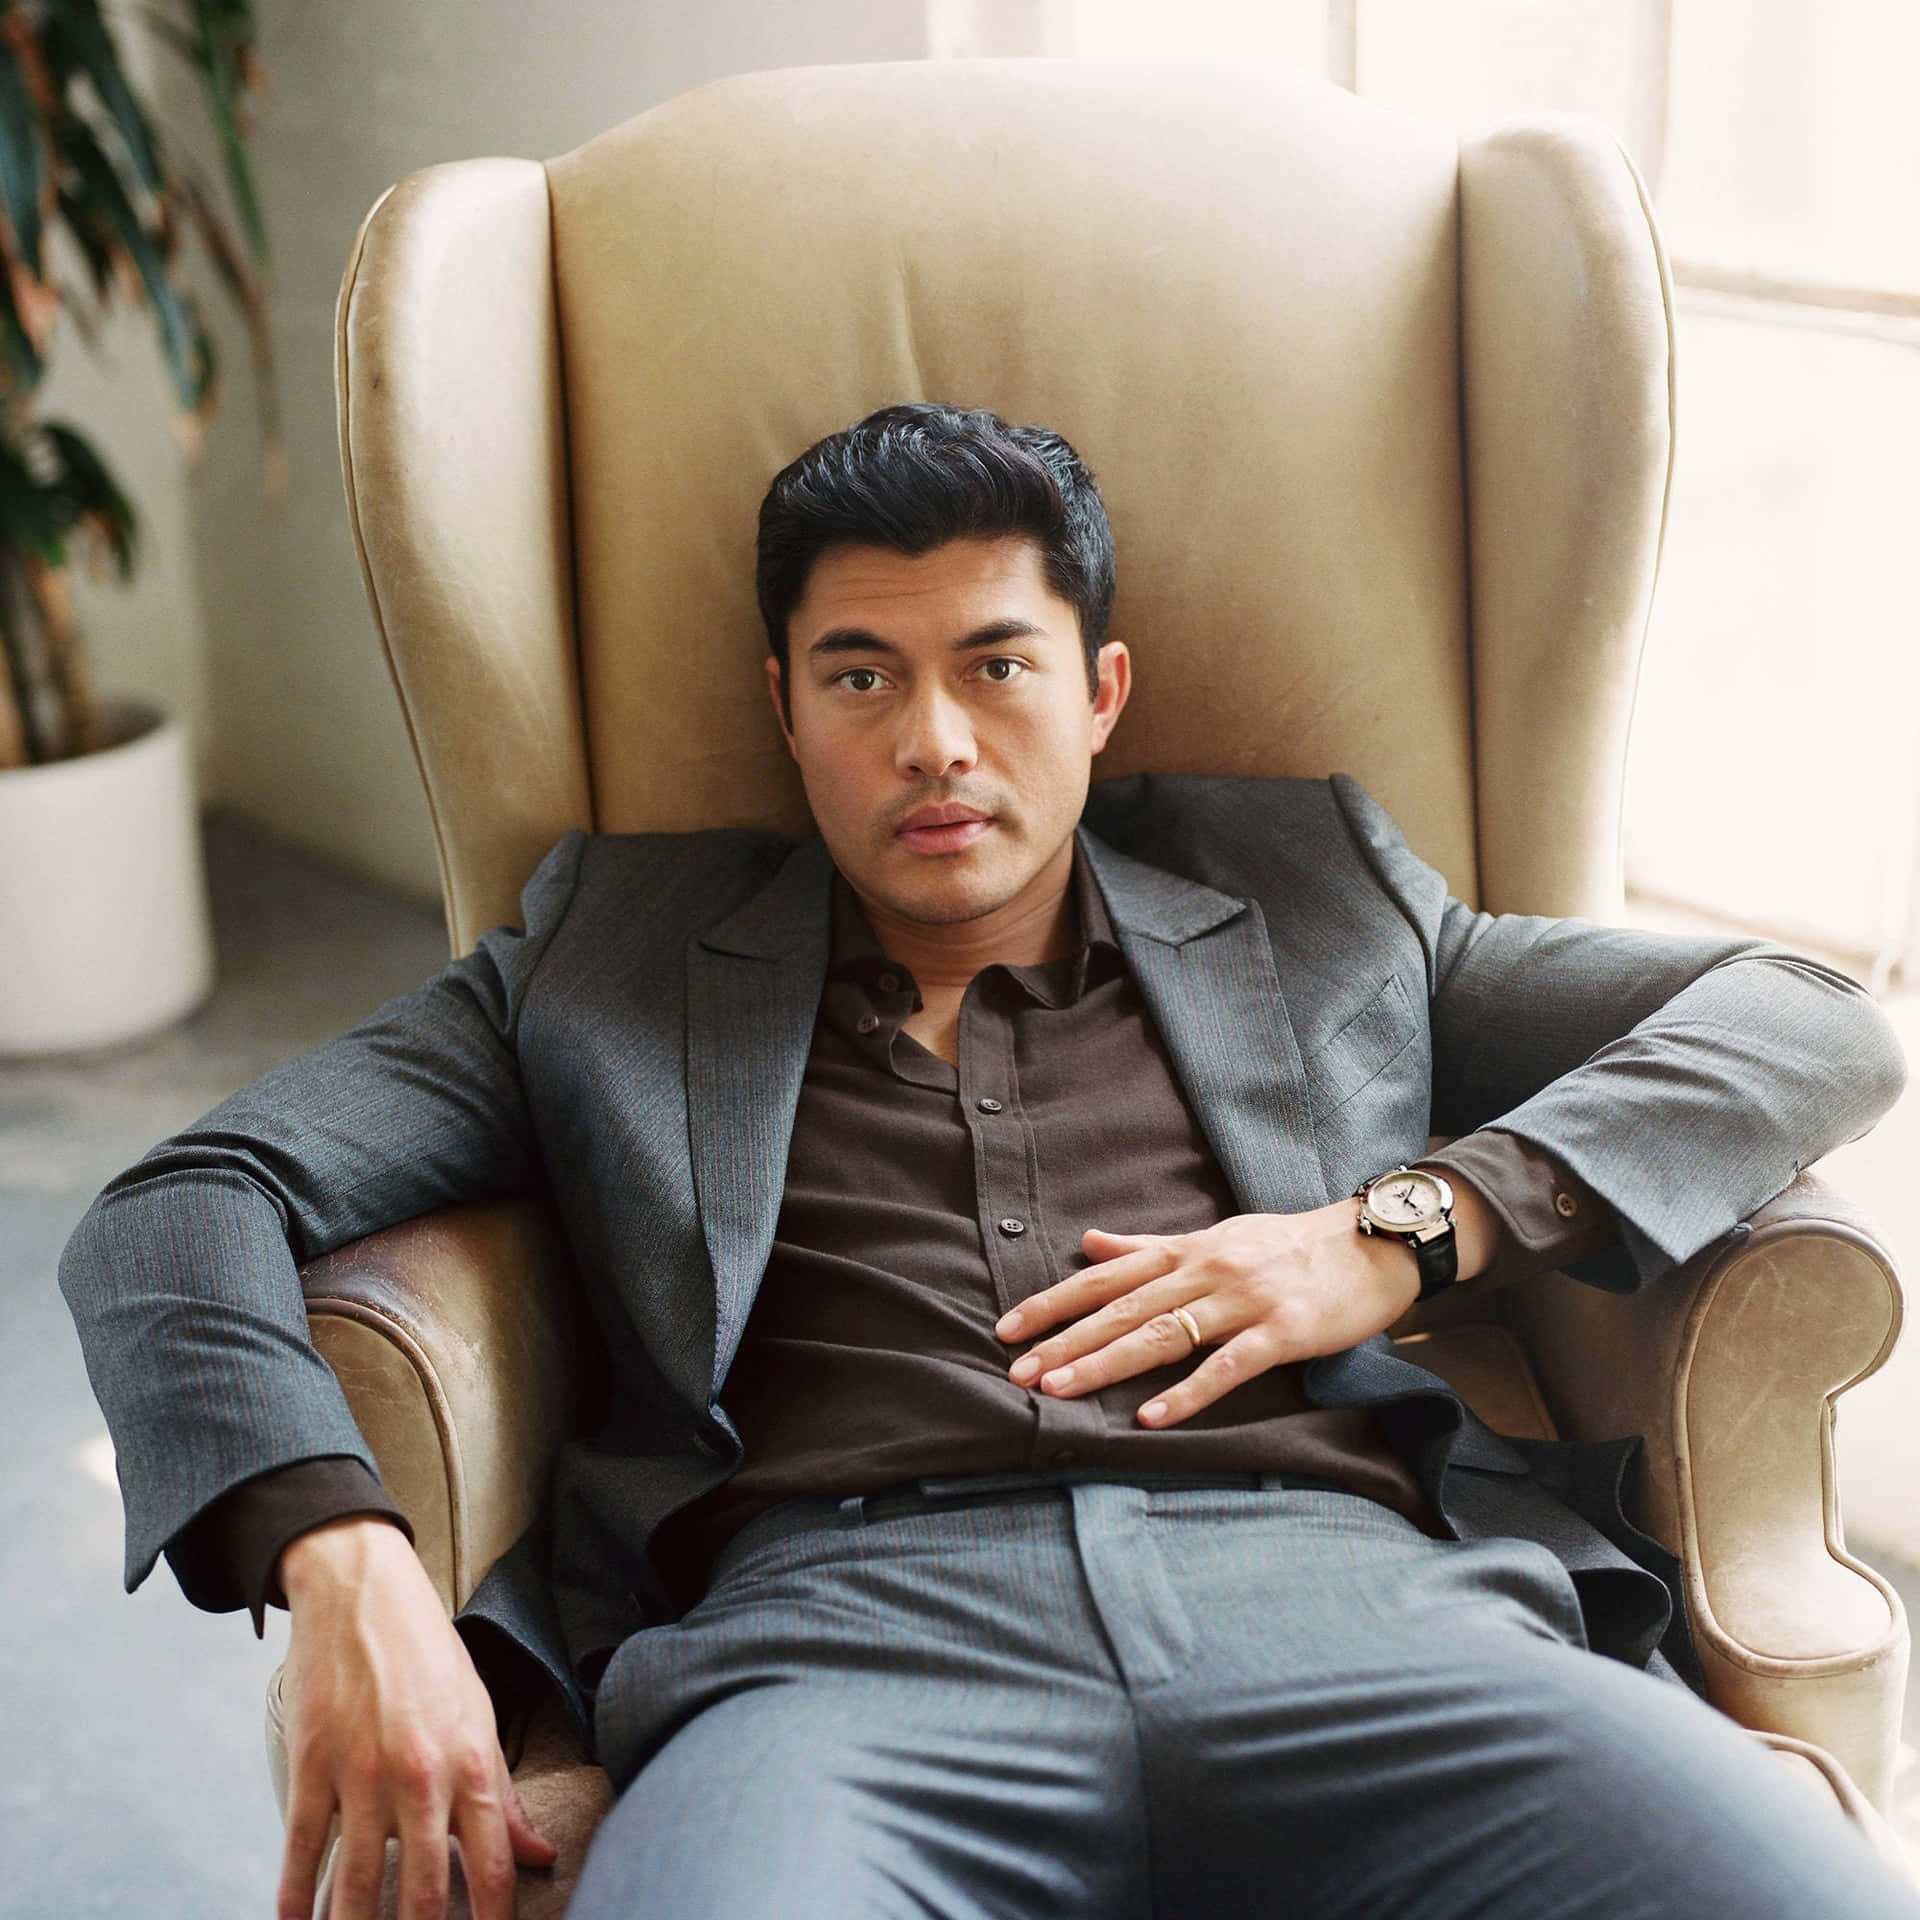 Asian Actor On The Chair Background